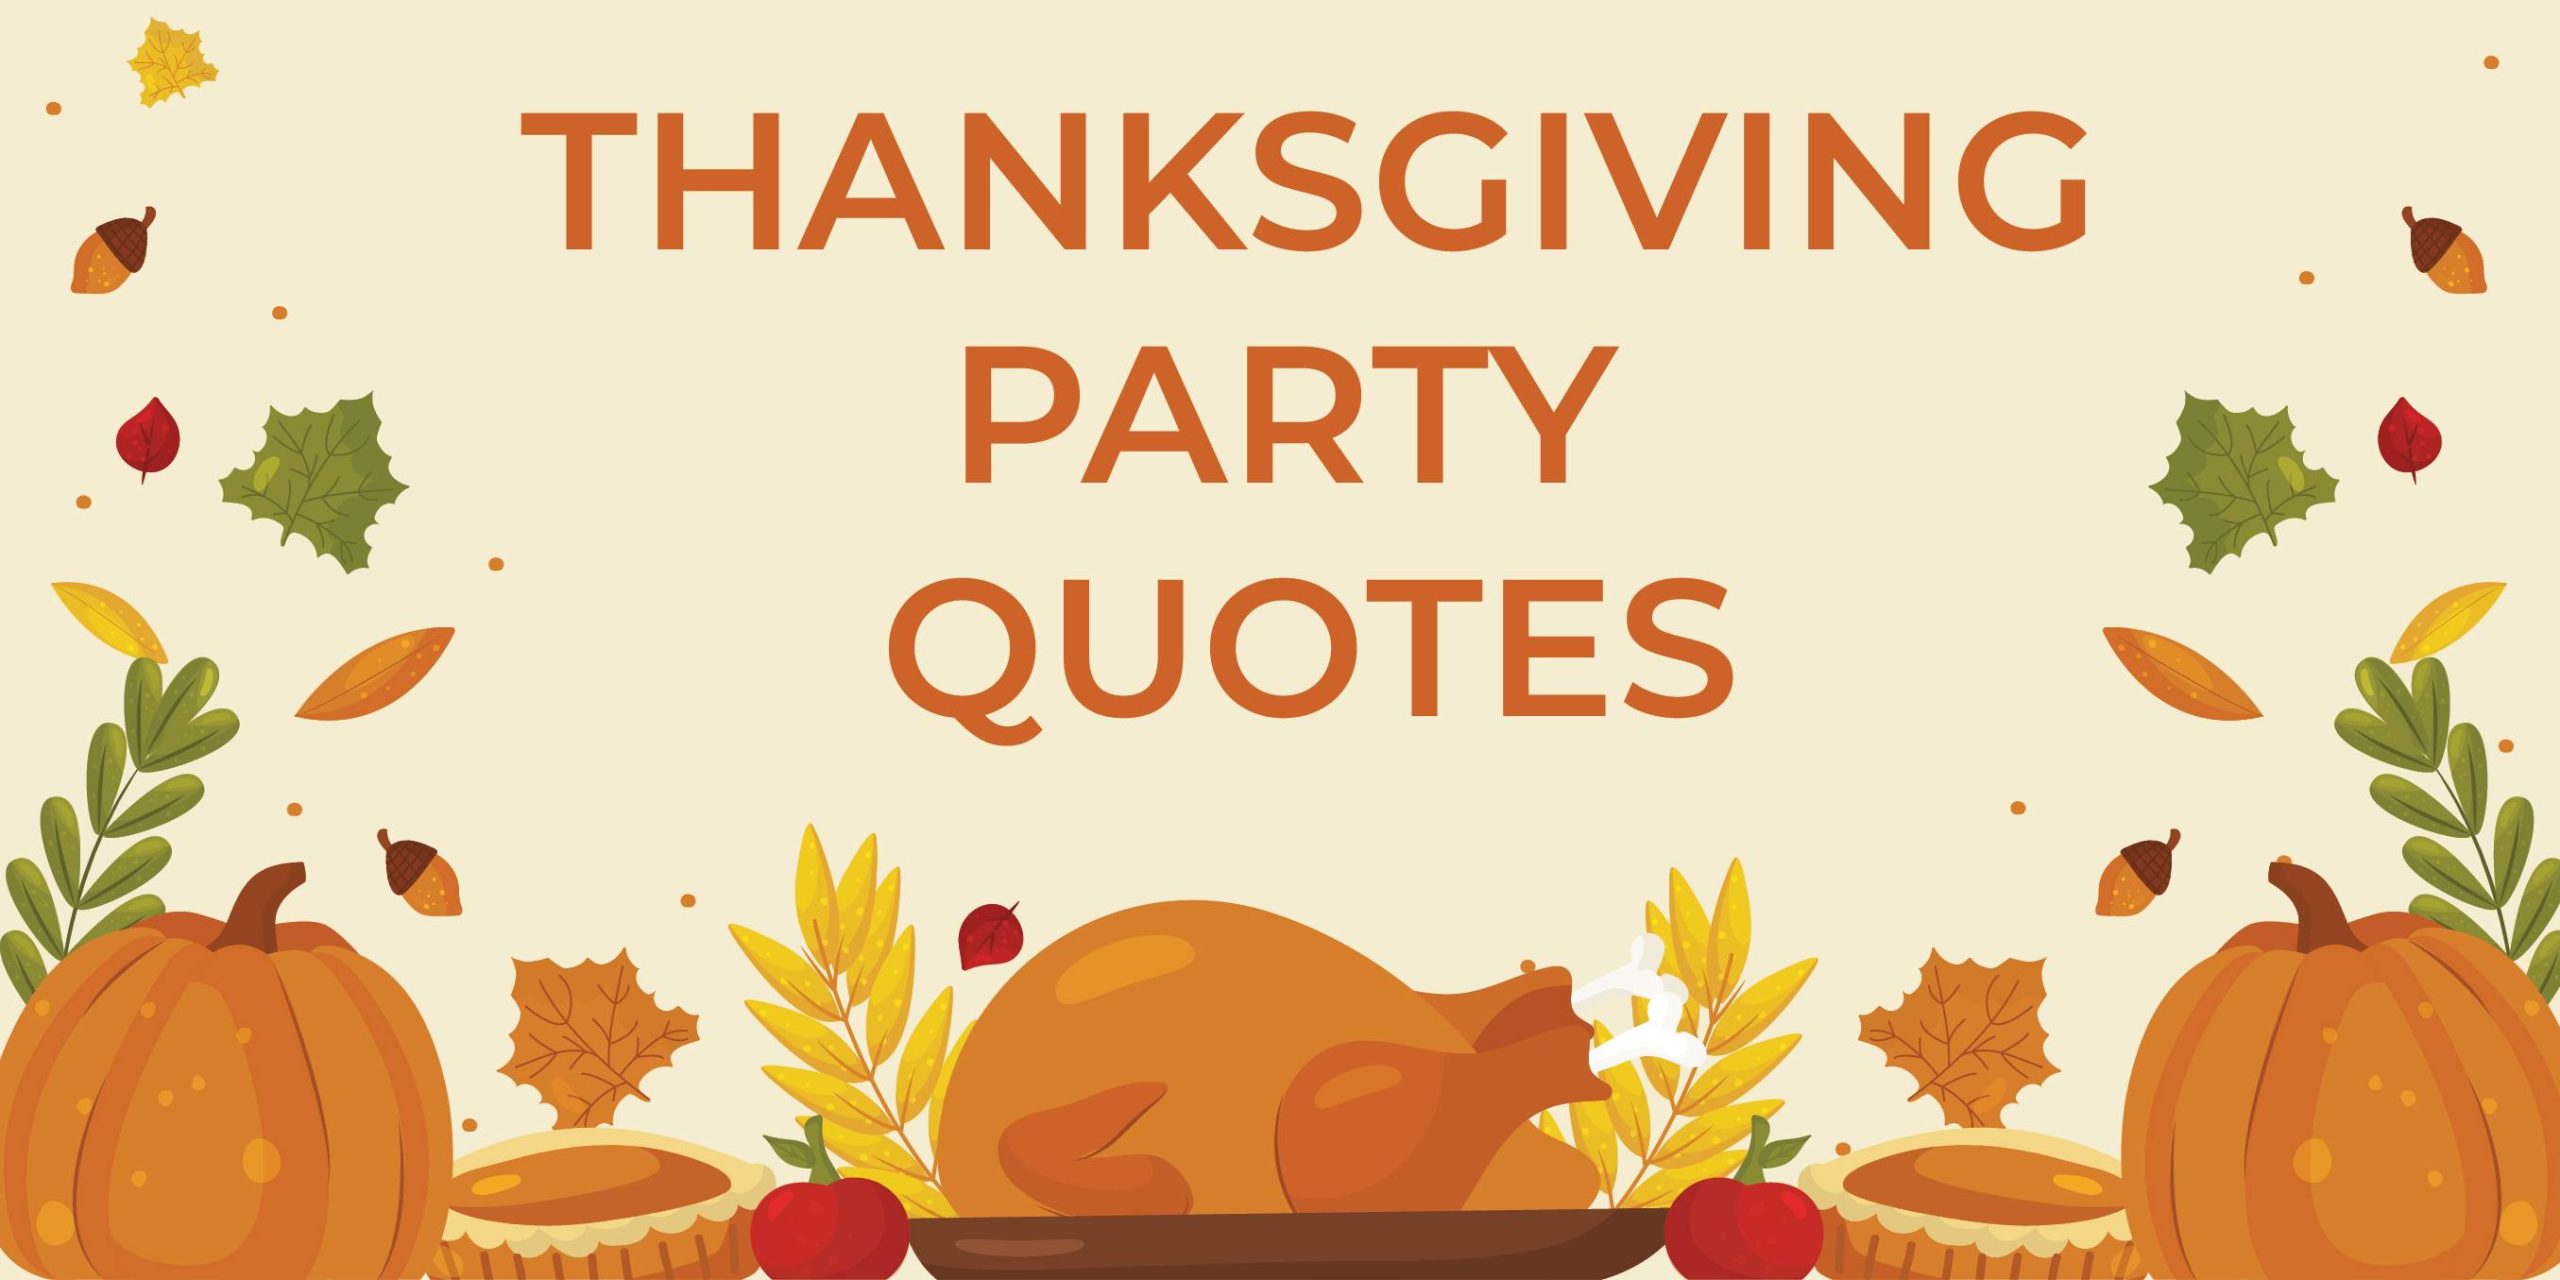 Thanksgiving Party Quotes